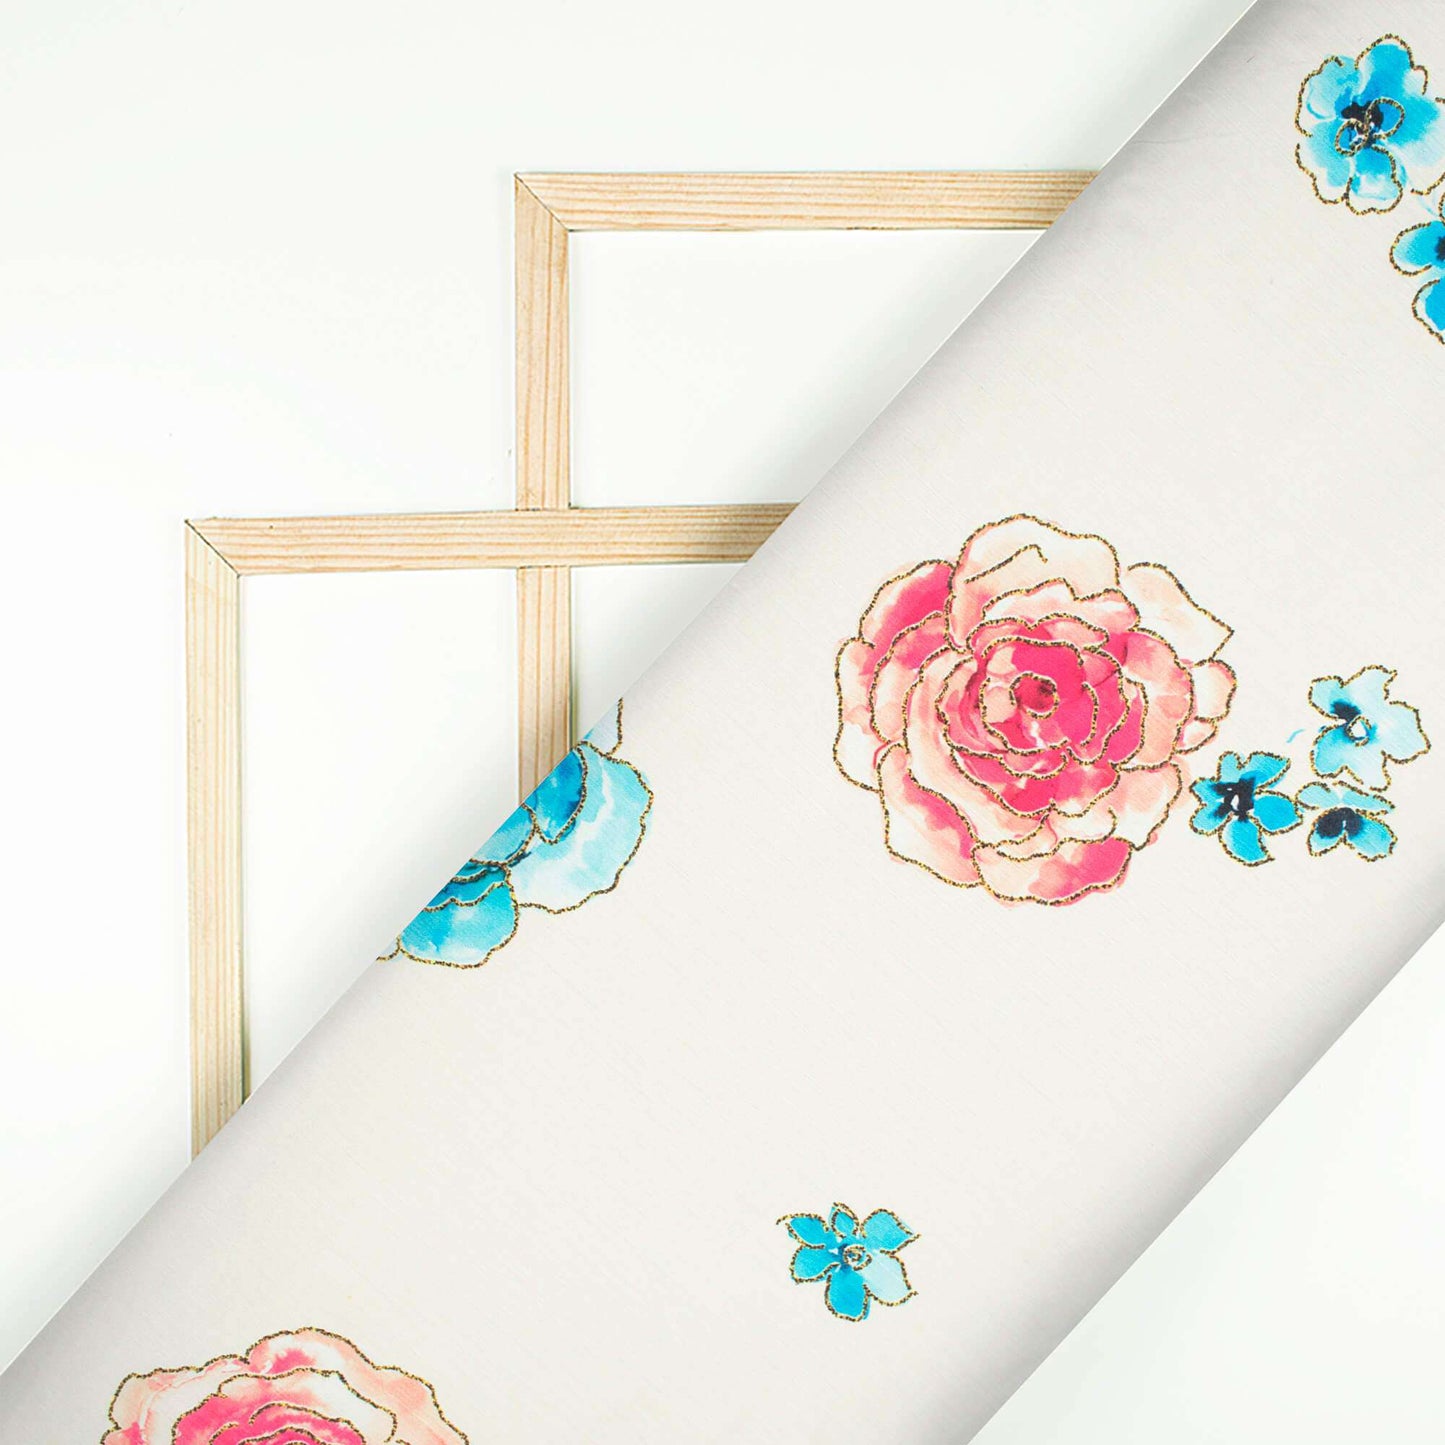 Ivory Cream And Sky Blue Floral Pattern Hand Paint Effect Digital Print Chiffon Satin Fabric